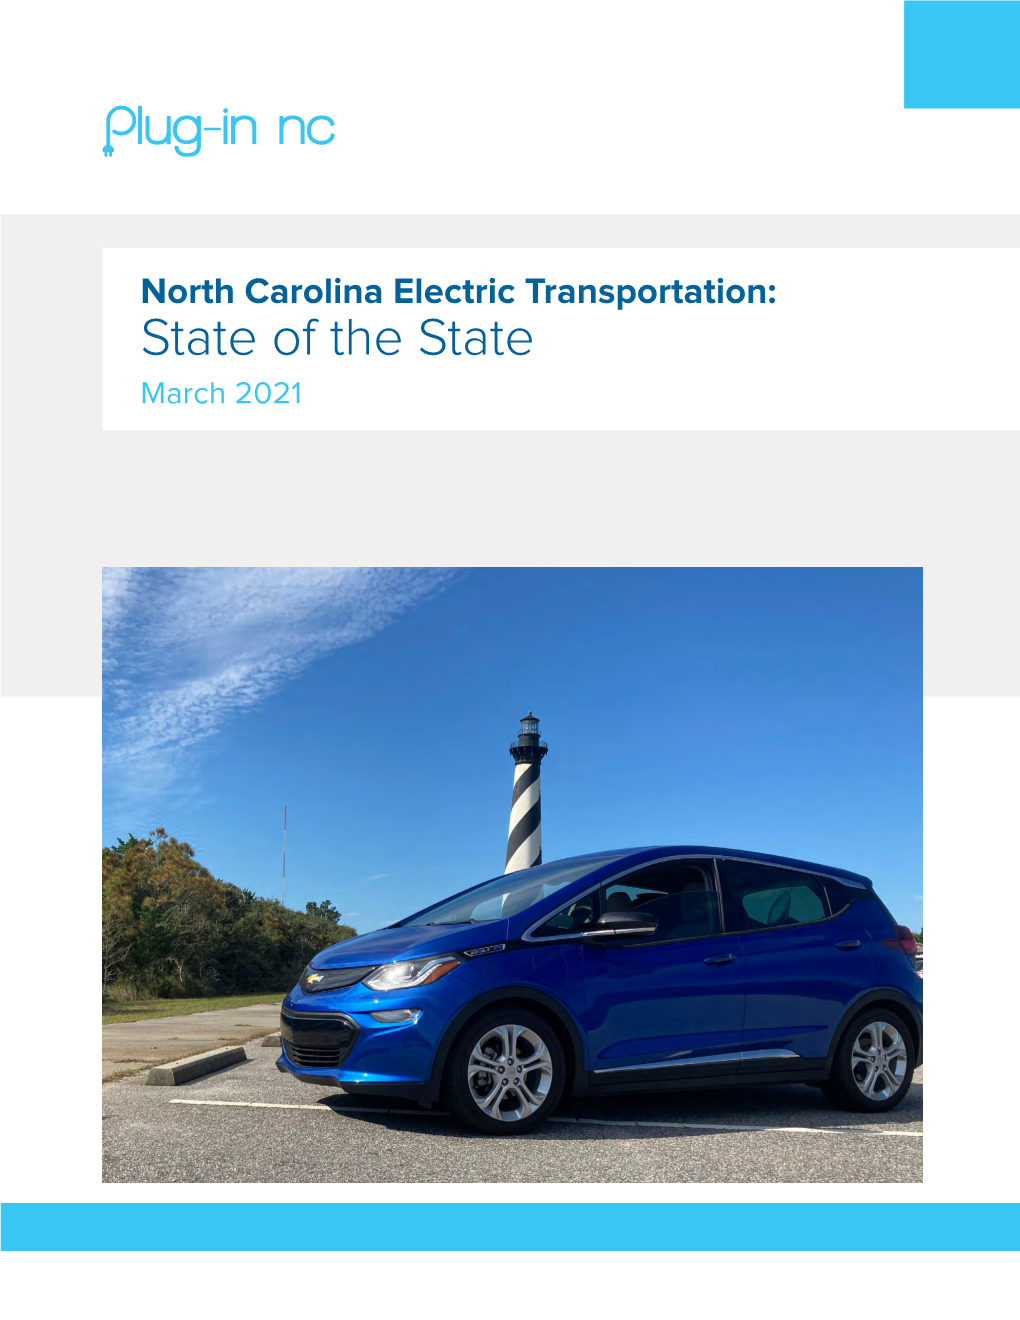 North Carolina Electric Transportation: State of the State March 2021 2